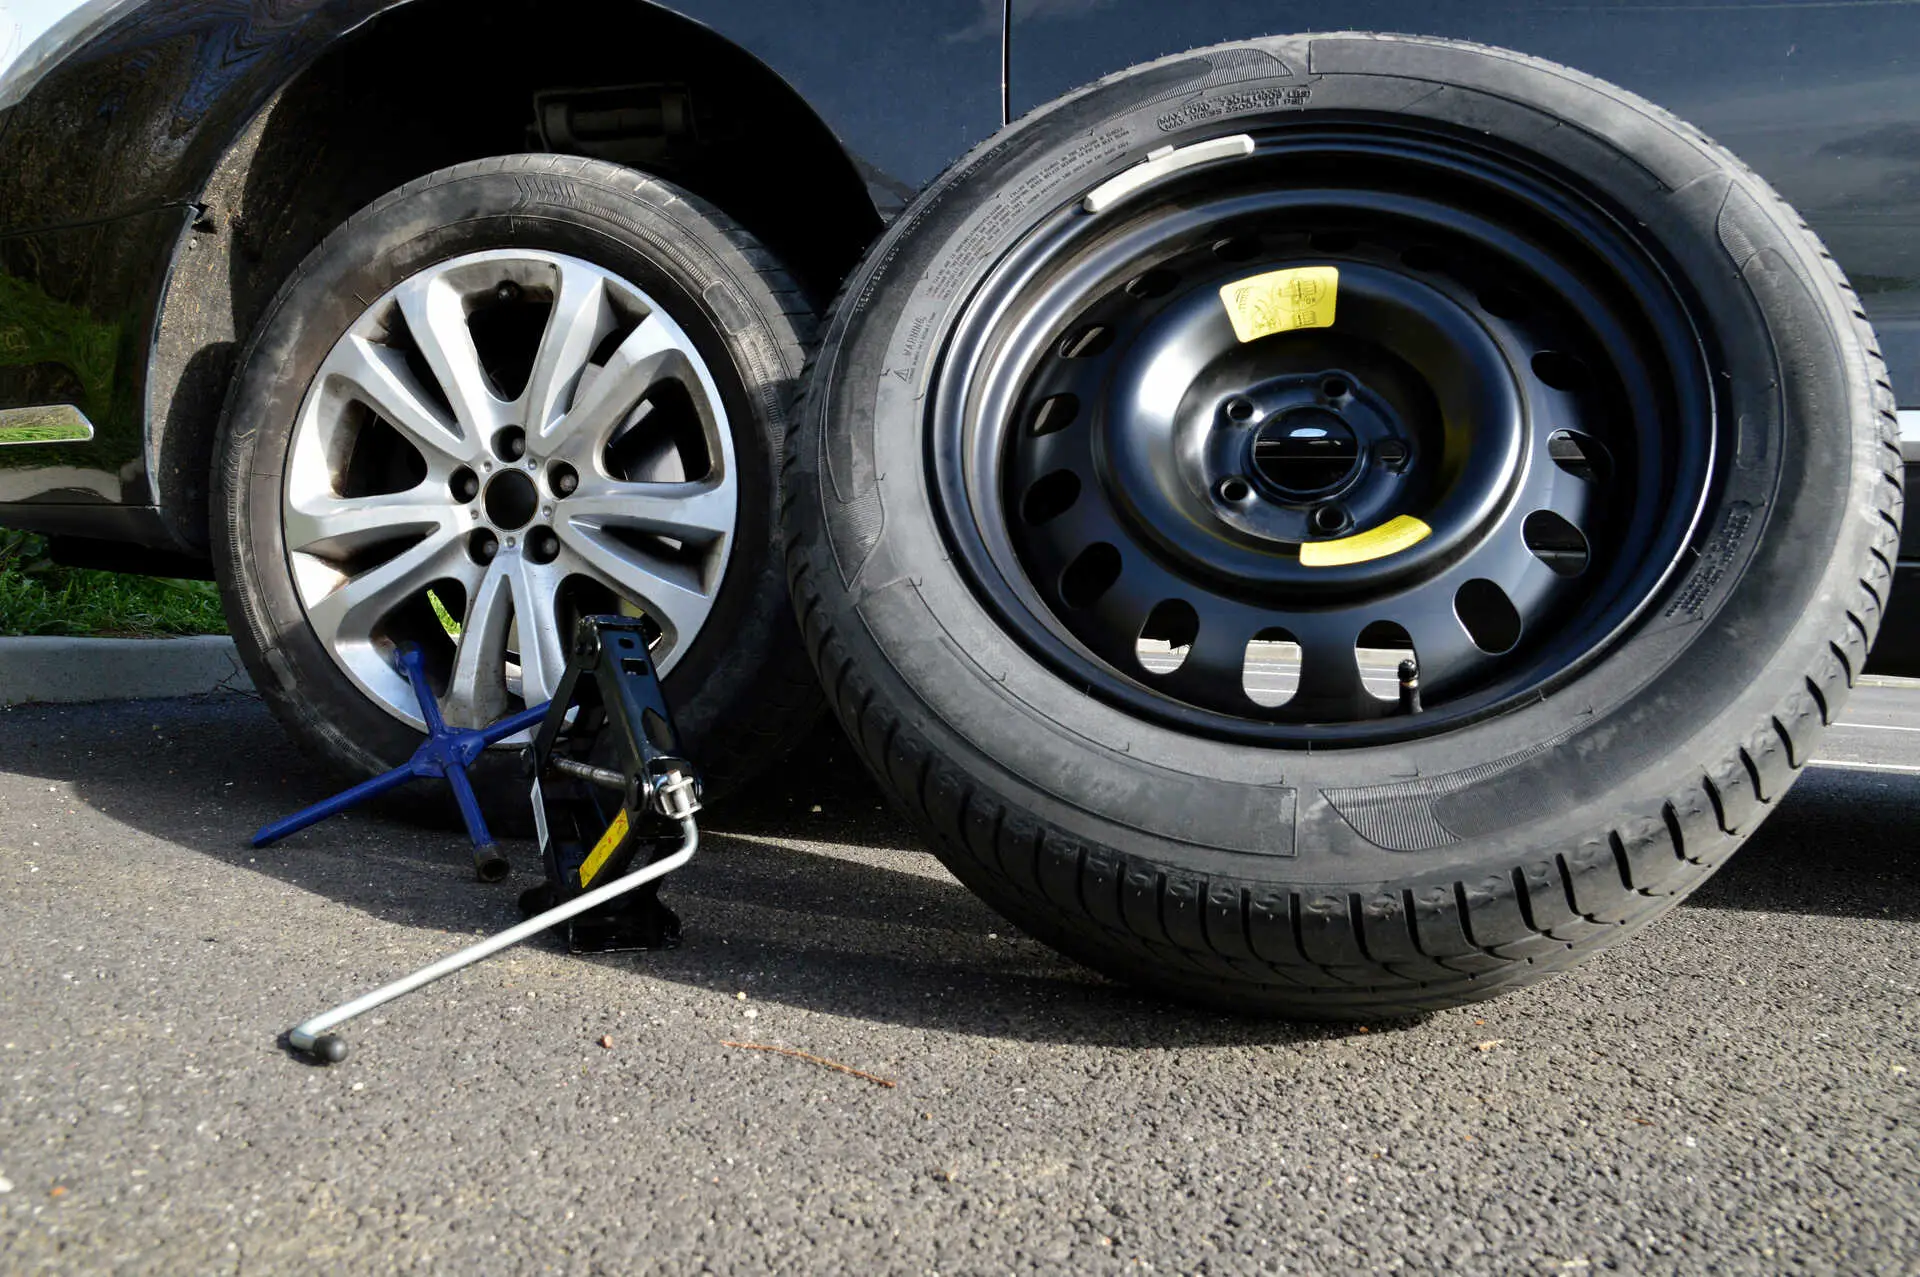 Tire change with aluminum rim and spare tire following a puncture, with a lug wrench and jack